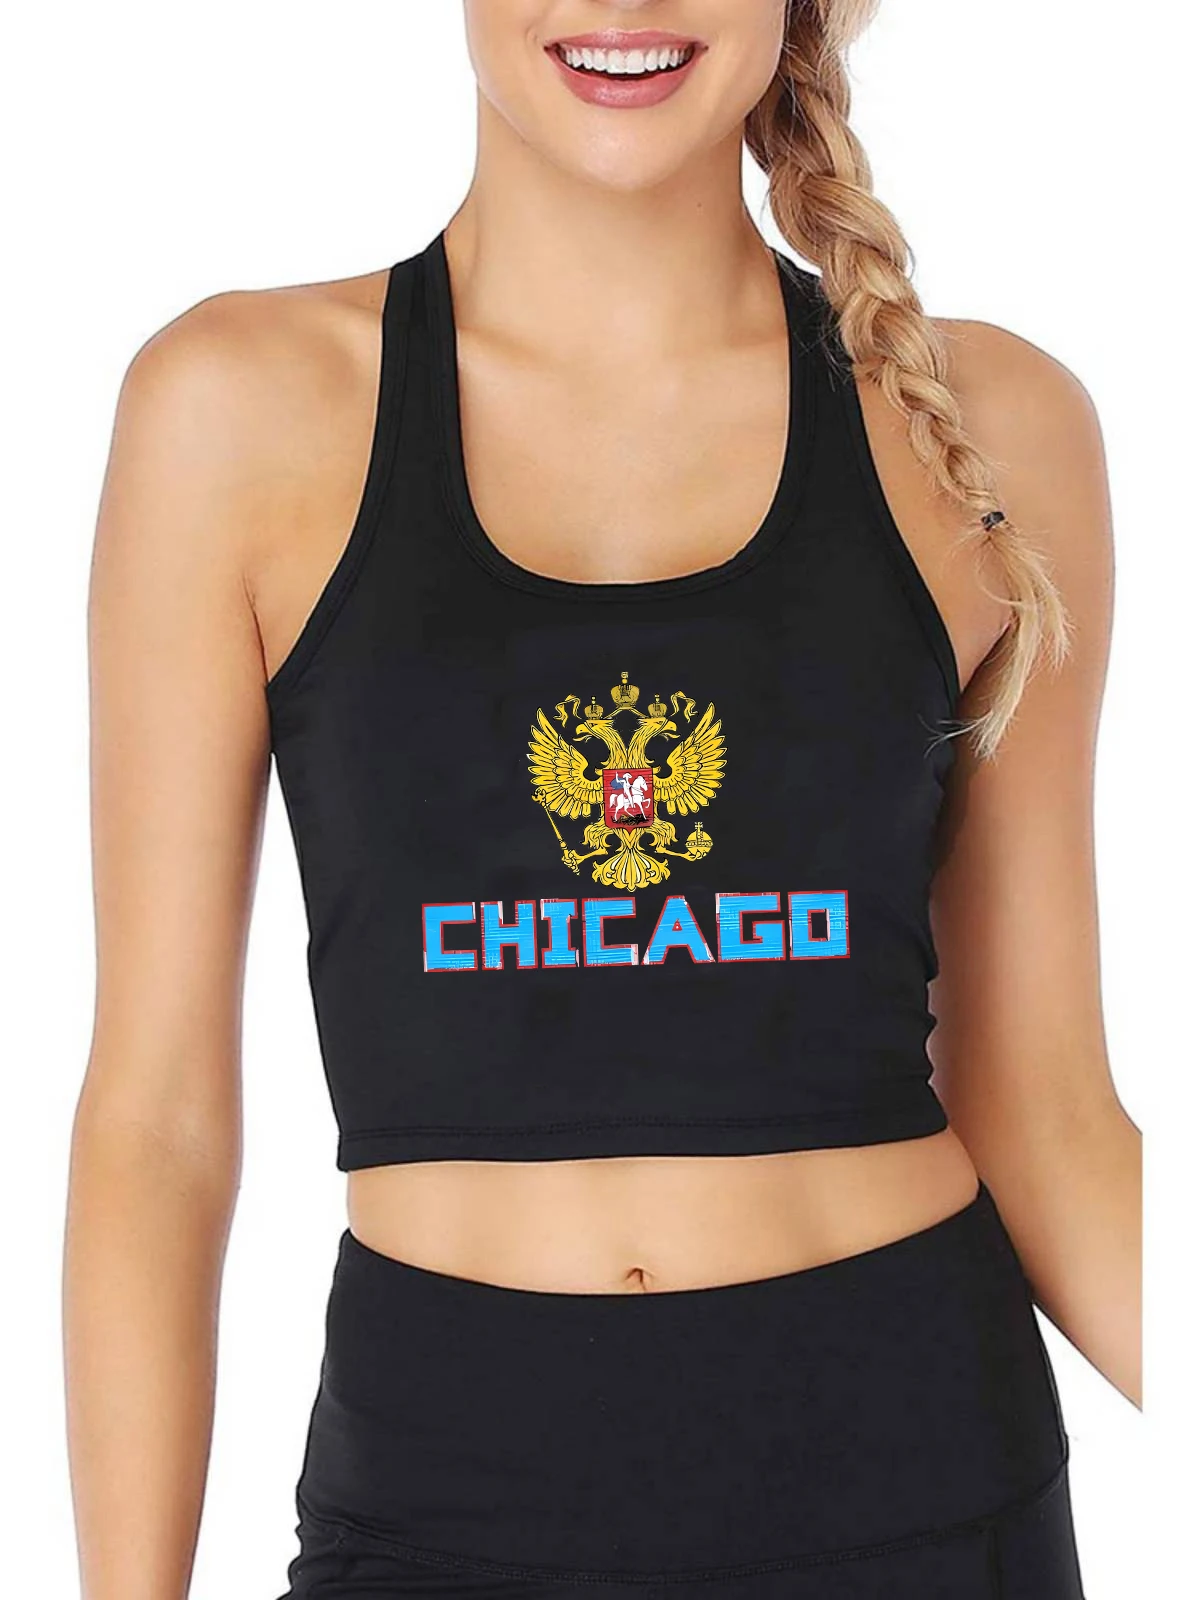 

Chicago Russian Flag Design Sexy Slim Fit Crop Top Girl's Sports Training Tank Tops Customizable Cotton Breathable Camisole